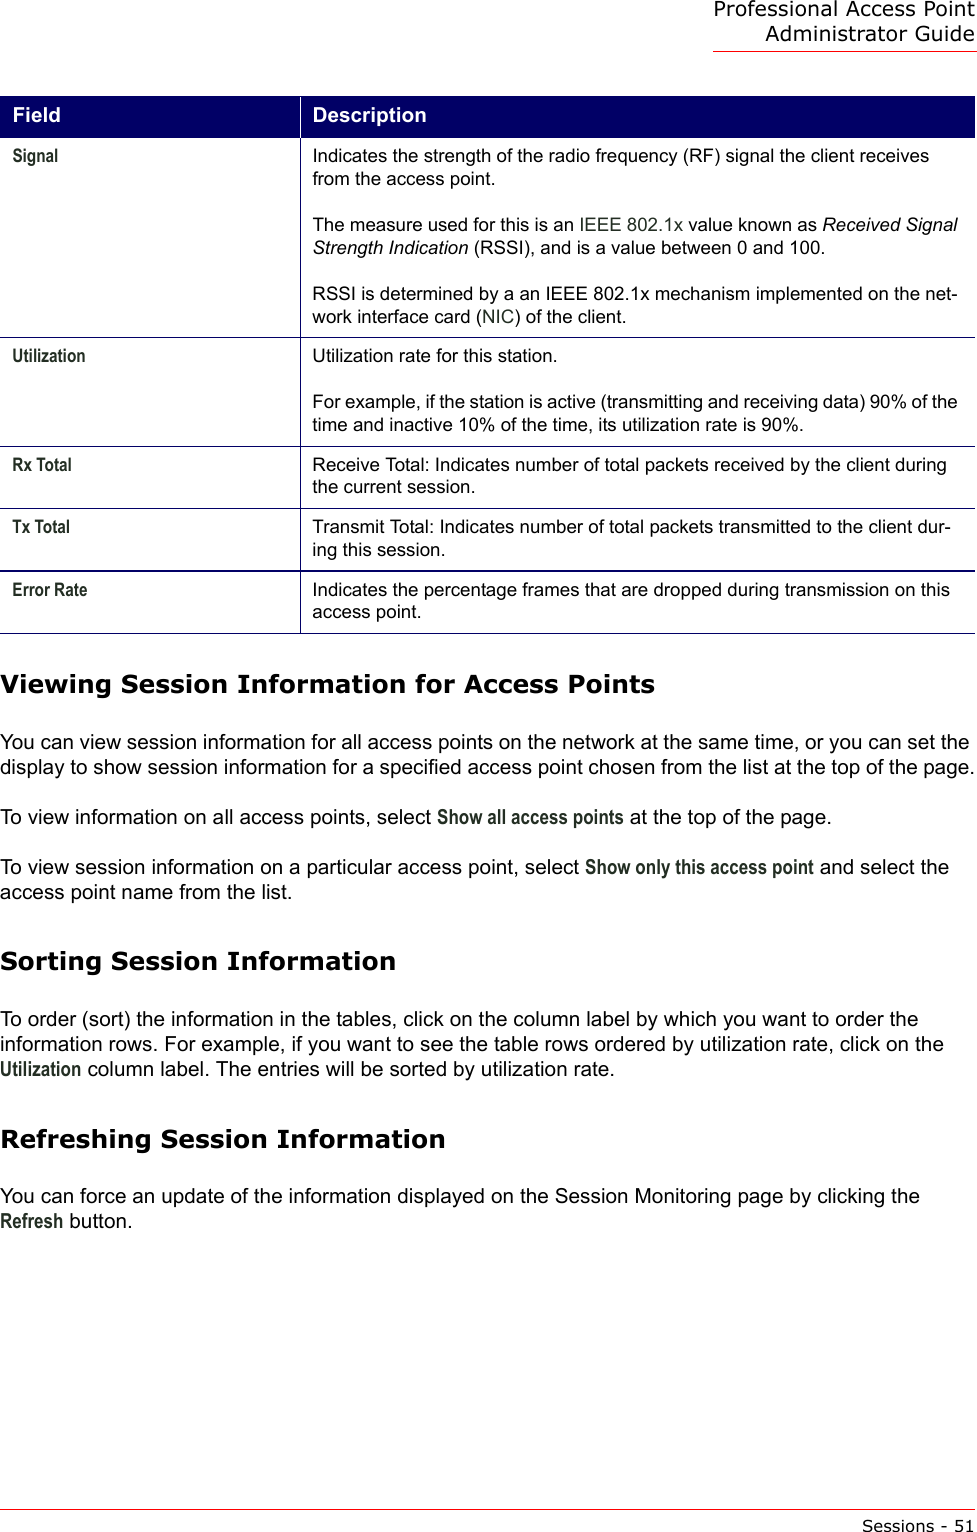 Professional Access Point Administrator GuideSessions - 51Viewing Session Information for Access PointsYou can view session information for all access points on the network at the same time, or you can set the display to show session information for a specified access point chosen from the list at the top of the page.To view information on all access points, select Show all access points at the top of the page.To view session information on a particular access point, select Show only this access point and select the access point name from the list.Sorting Session InformationTo order (sort) the information in the tables, click on the column label by which you want to order the information rows. For example, if you want to see the table rows ordered by utilization rate, click on the Utilization column label. The entries will be sorted by utilization rate.Refreshing Session InformationYou can force an update of the information displayed on the Session Monitoring page by clicking the Refresh button.Signal Indicates the strength of the radio frequency (RF) signal the client receives from the access point.The measure used for this is an IEEE 802.1x value known as Received Signal Strength Indication (RSSI), and is a value between 0 and 100.RSSI is determined by a an IEEE 802.1x mechanism implemented on the net-work interface card (NIC) of the client.Utilization Utilization rate for this station.For example, if the station is active (transmitting and receiving data) 90% of the time and inactive 10% of the time, its utilization rate is 90%.Rx Total Receive Total: Indicates number of total packets received by the client during the current session.Tx Total Transmit Total: Indicates number of total packets transmitted to the client dur-ing this session.Error Rate Indicates the percentage frames that are dropped during transmission on this access point.Field Description